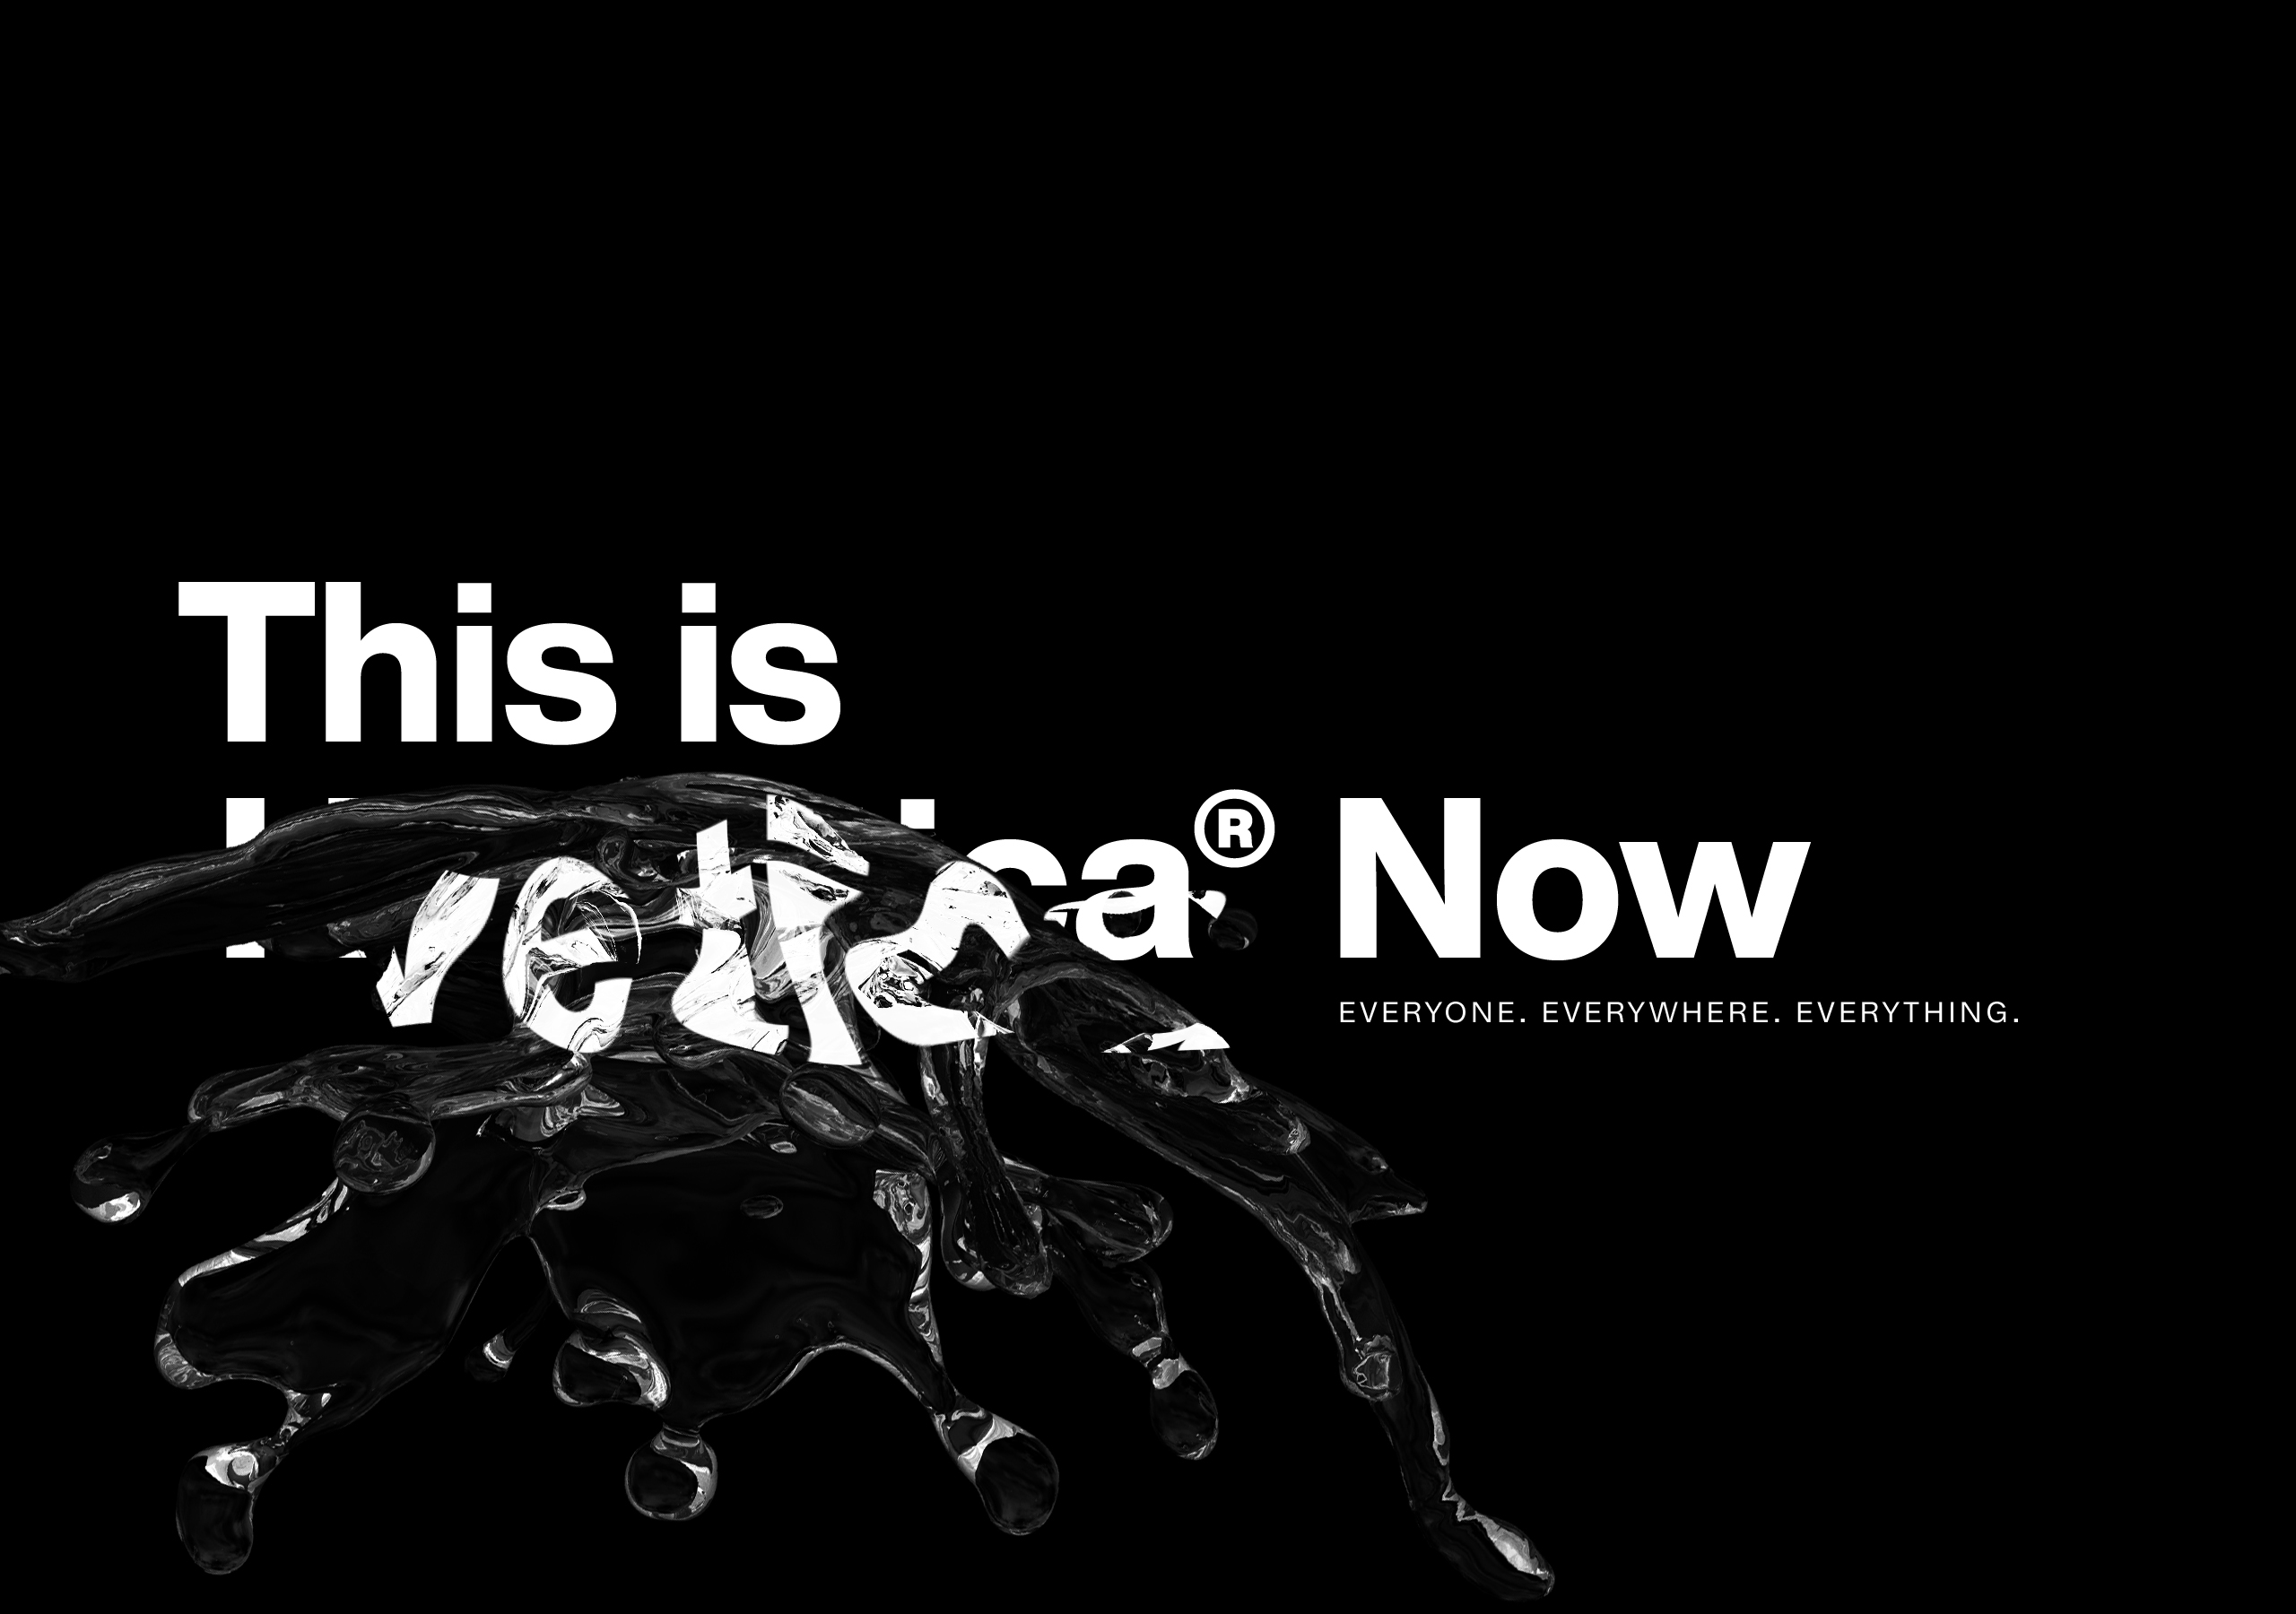 Helvetica Now is the most recent update of the classic font Helvetica.